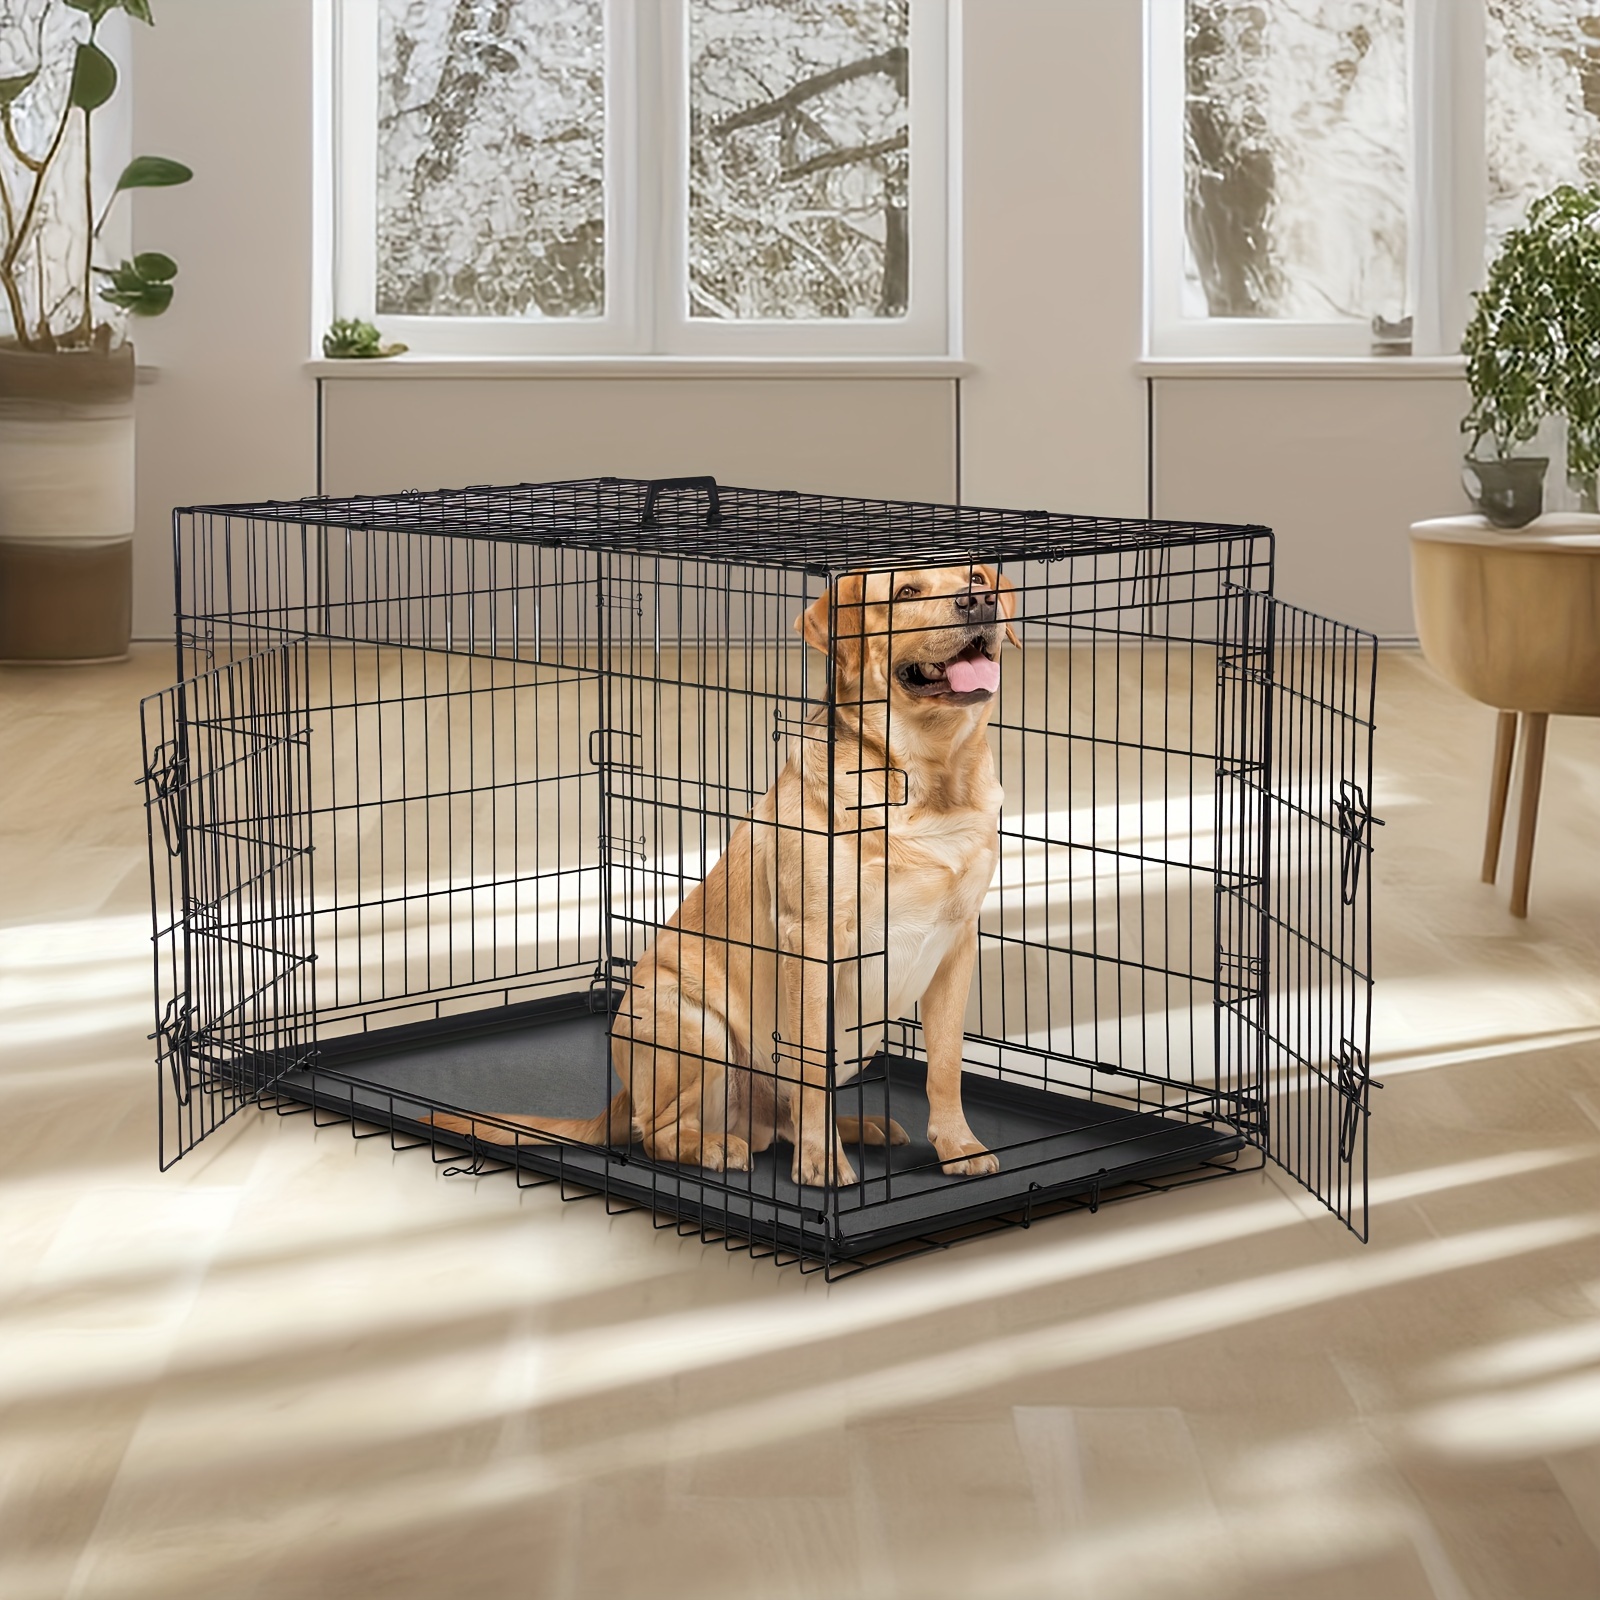 

Small Double Door Metal Dog Crate - 30 Inch With Divider Panel, Leak-proof Pan Tray: Folding And Portable Wire Cage For Indoor Outdoor Travel